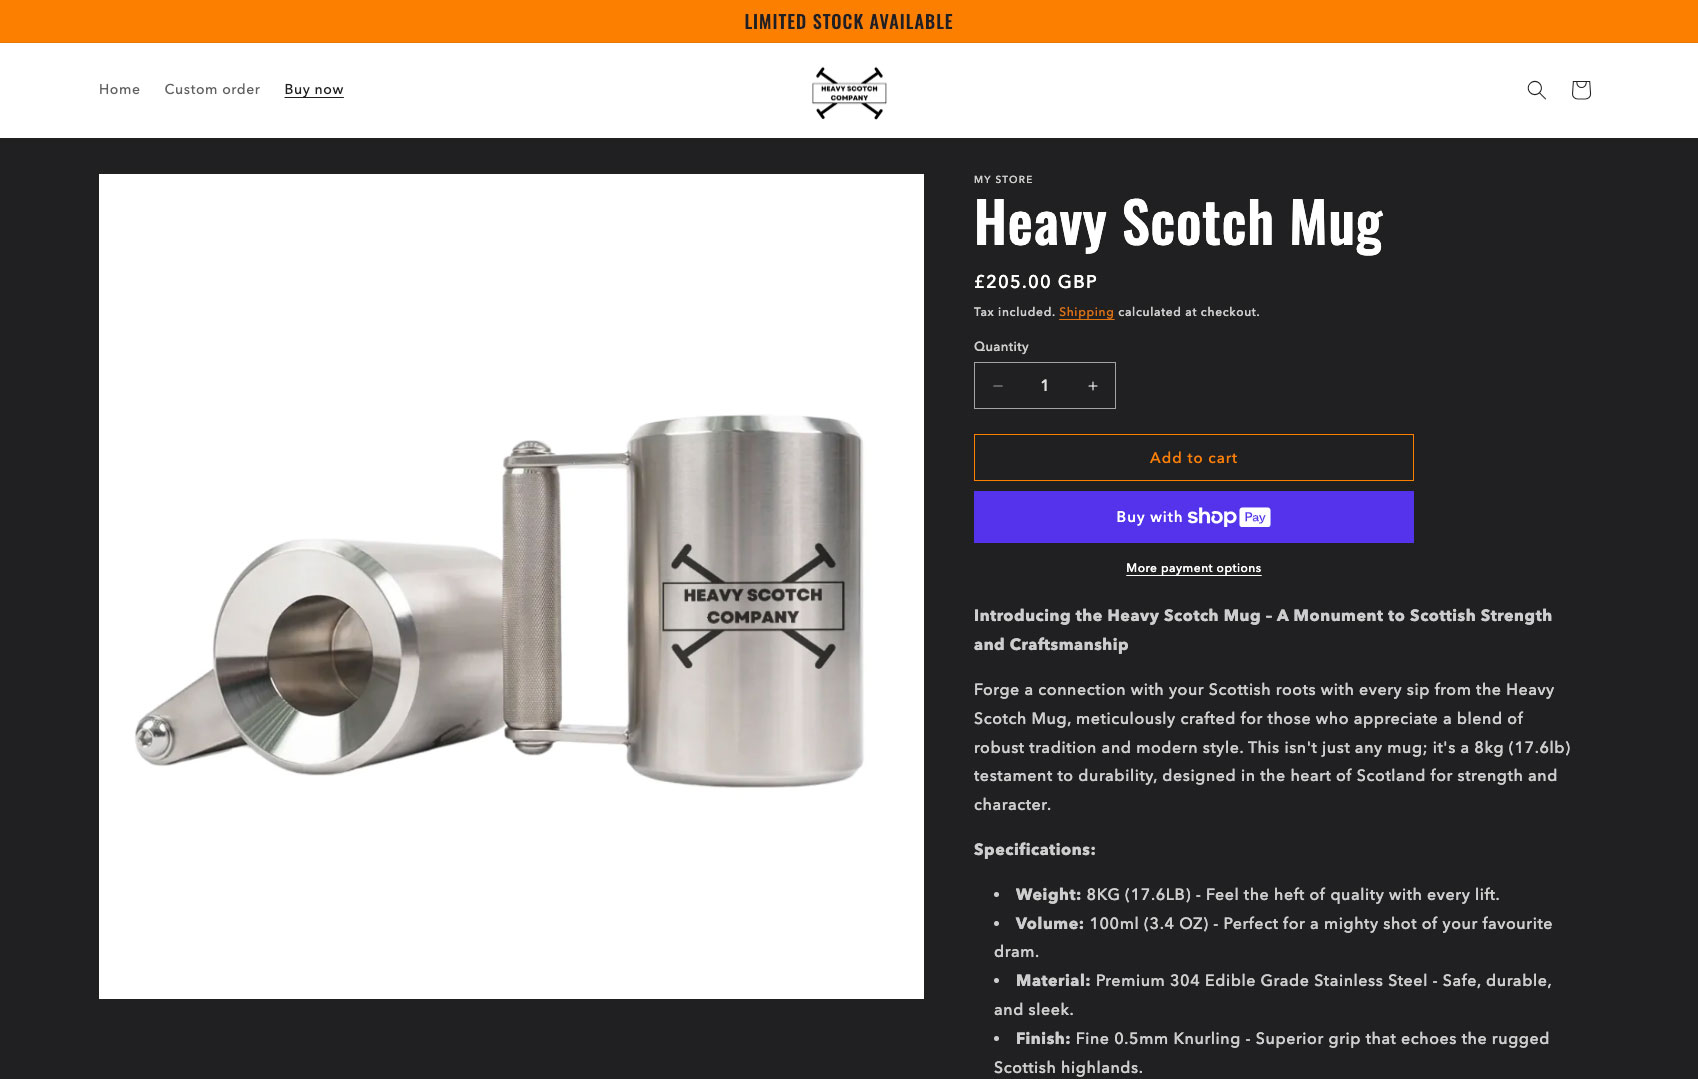 Website design, development, and hosting for Heavy Scotch Company to sell their products online